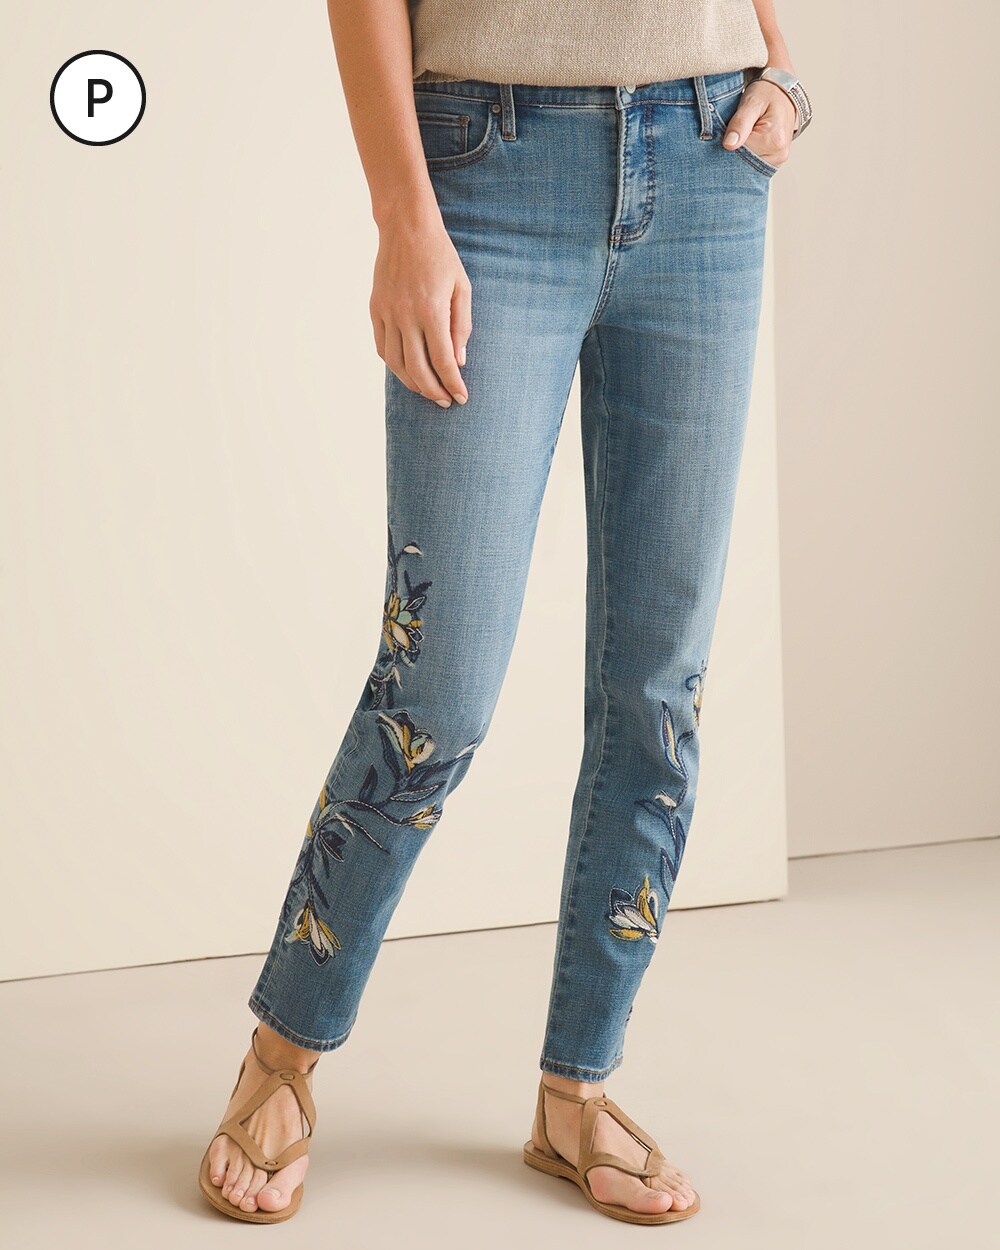 So Slimming Petite Vine Embroidered Girlfriend Ankle Jeans